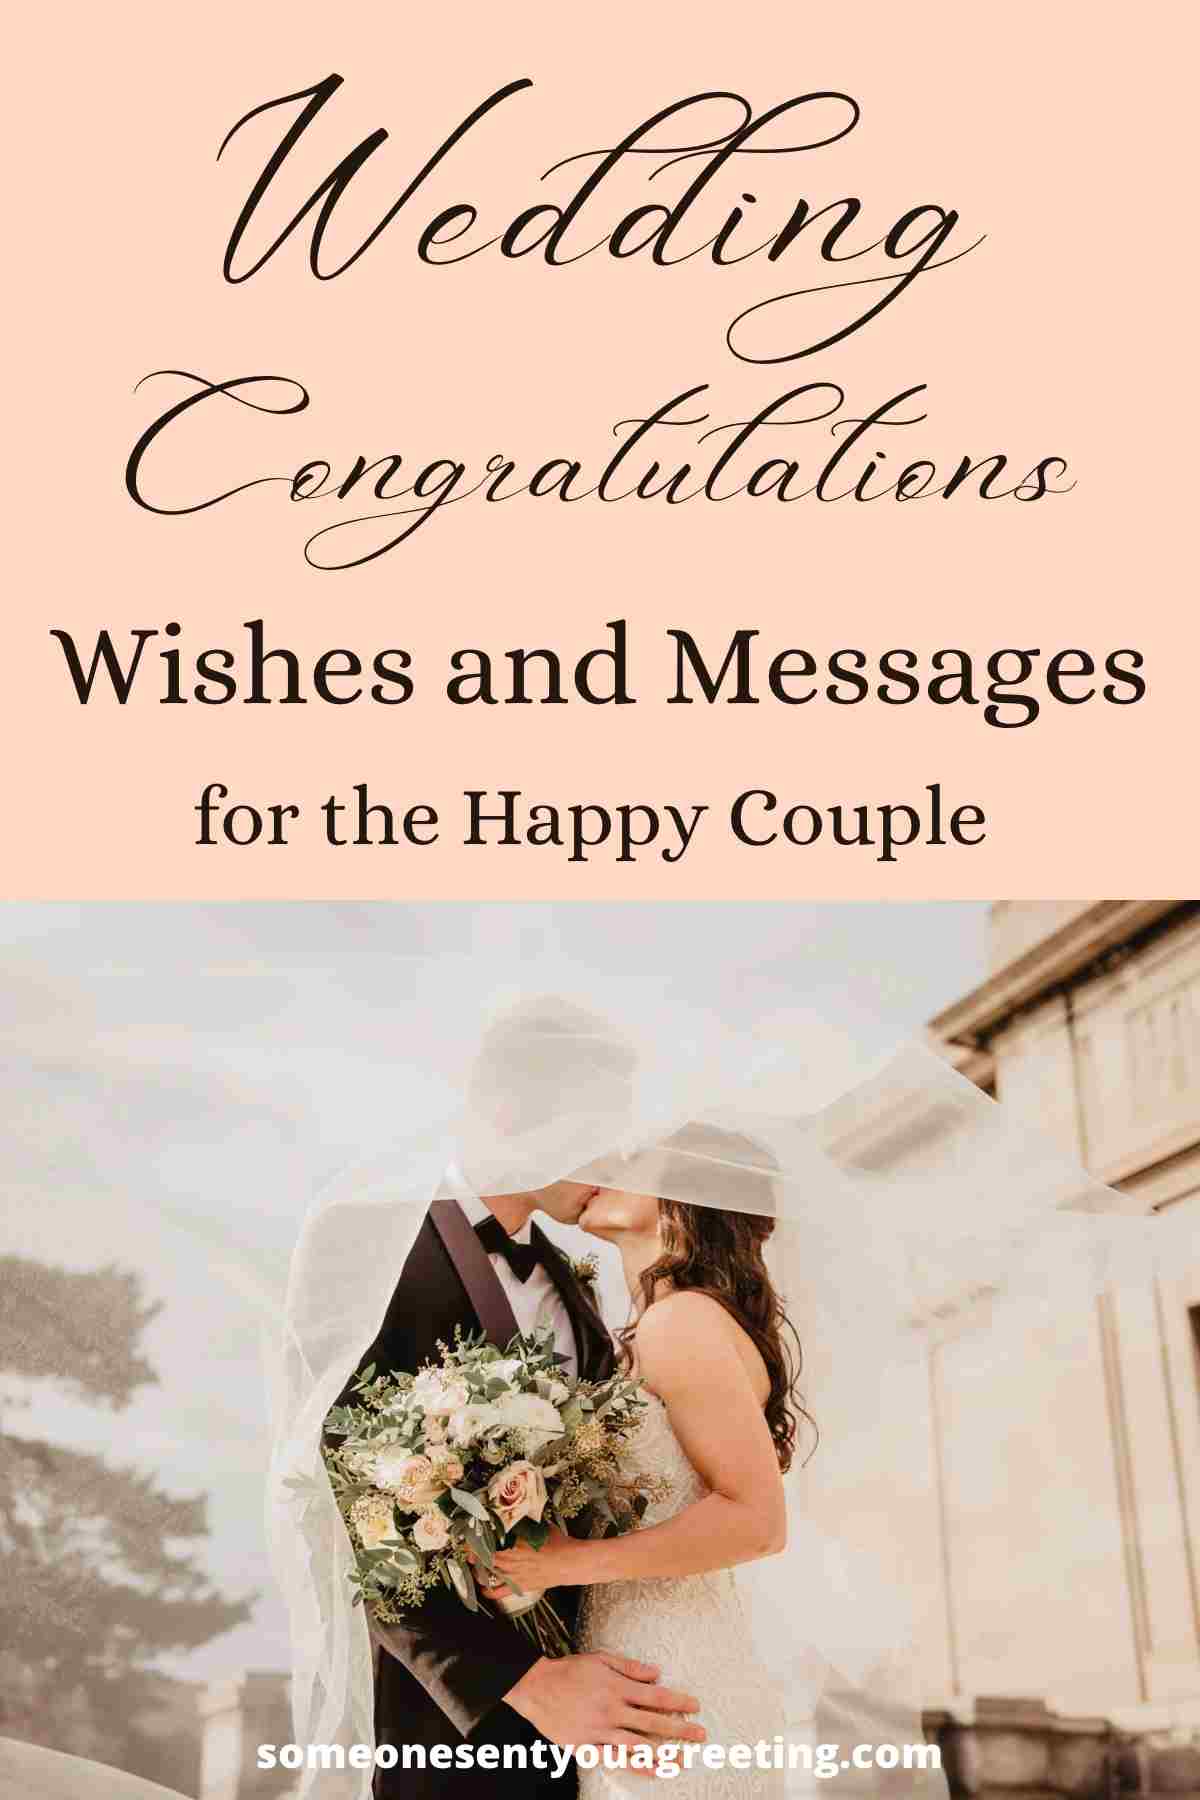 wedding congratulations wishes and messages for the happy couple